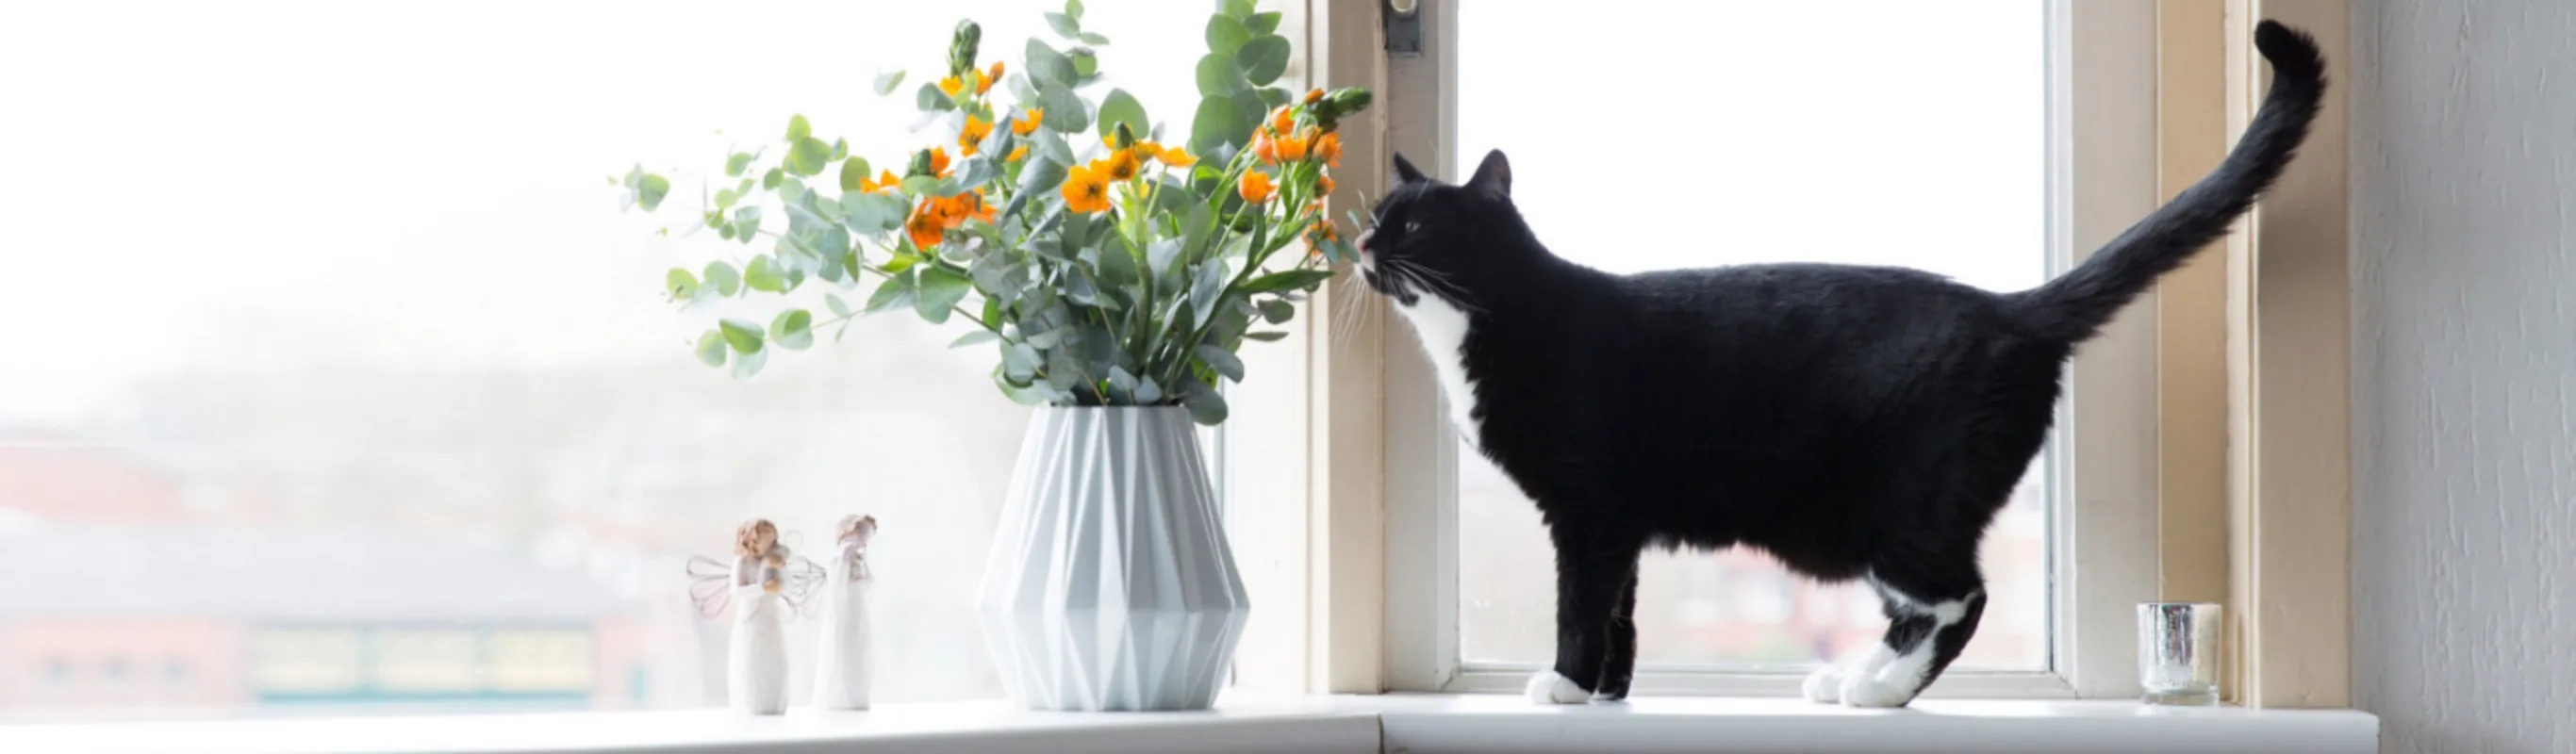 A Black Cat Standing Next to a Flower Vase on a Window